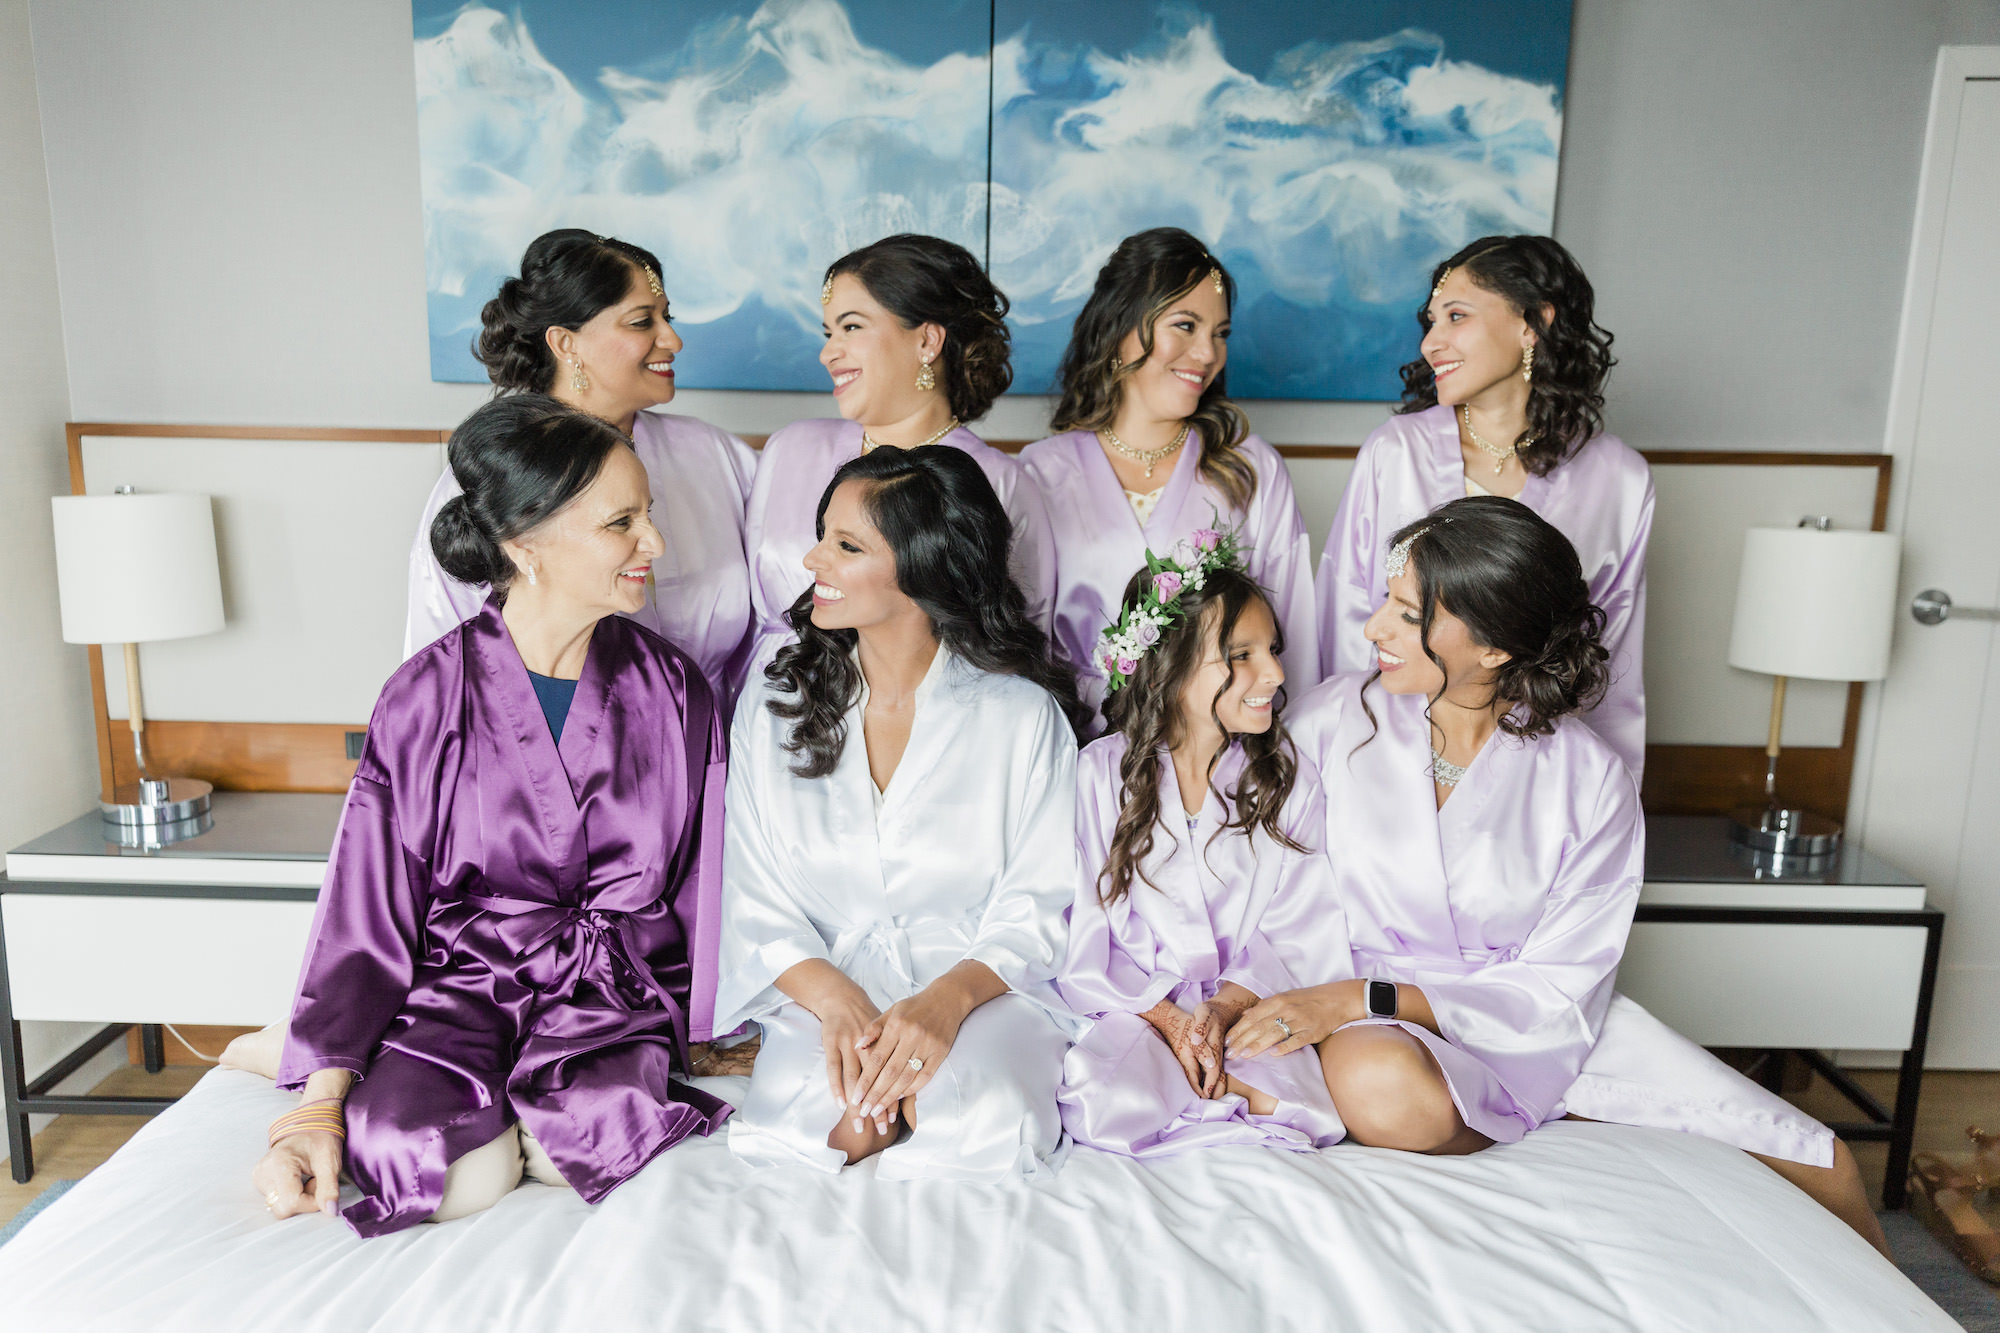 Bride and Bridesmaids Getting Ready Wedding Portrait | Lavender and Violet Satin Robe Ideas | Tampa Bay Hair and Makeup Artist Michele Renee The Studio